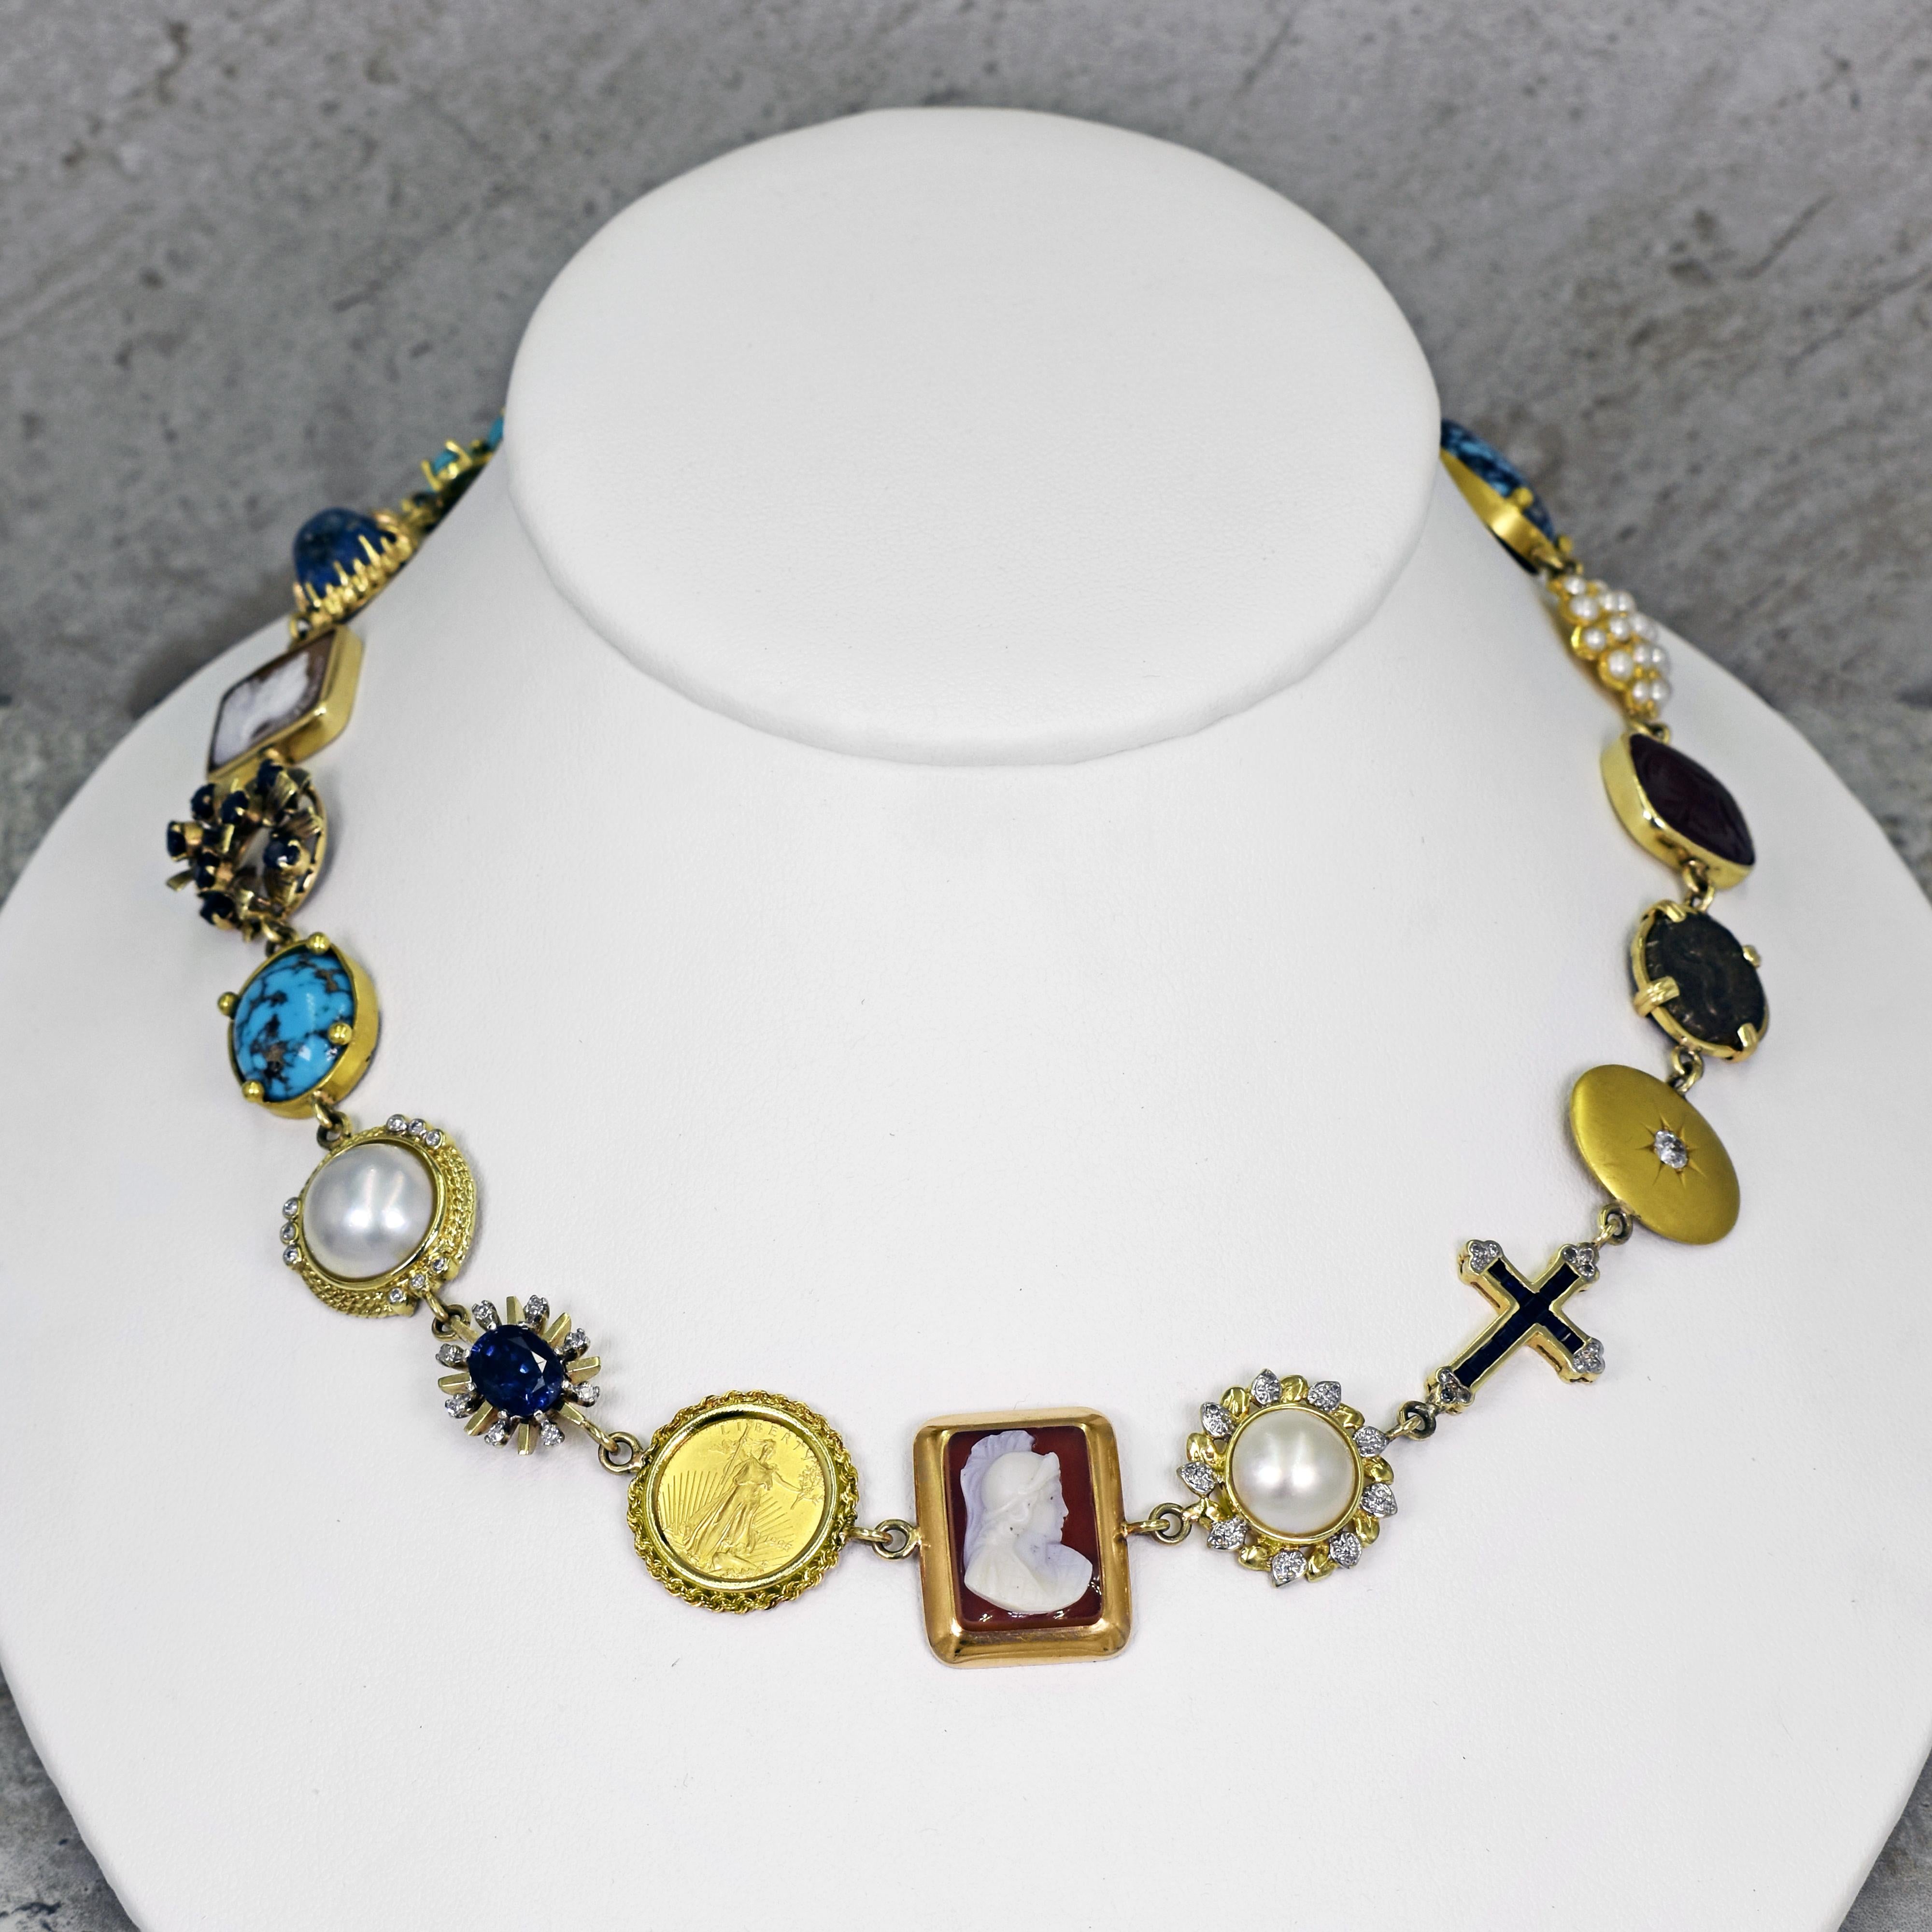 One-of-a-kind Vicki Orr 14k yellow gold Bohemian necklace with a variety of gemstones, vintage and antique jewelry components and an ancient coin. Necklace has 17 unique pieces, featuring Persian Turquoise, Lapis Lazuli, Vintage Cameo, Blue